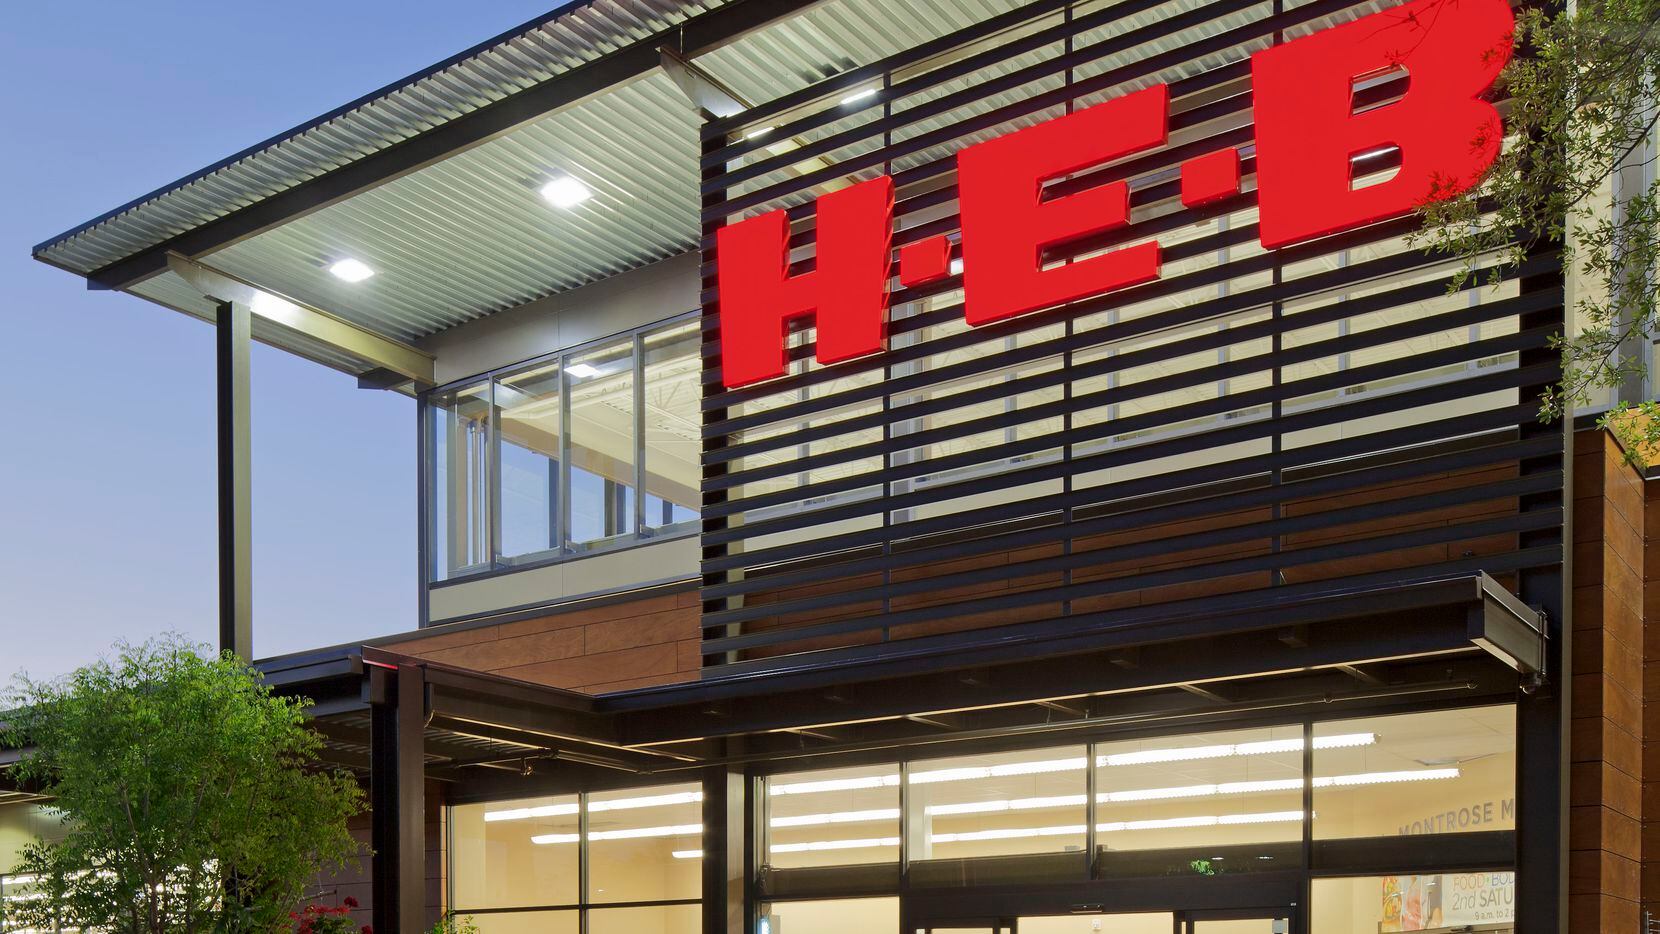 H-E-B hasn't said yet when a new grocery store will be built in Forney, but the city...